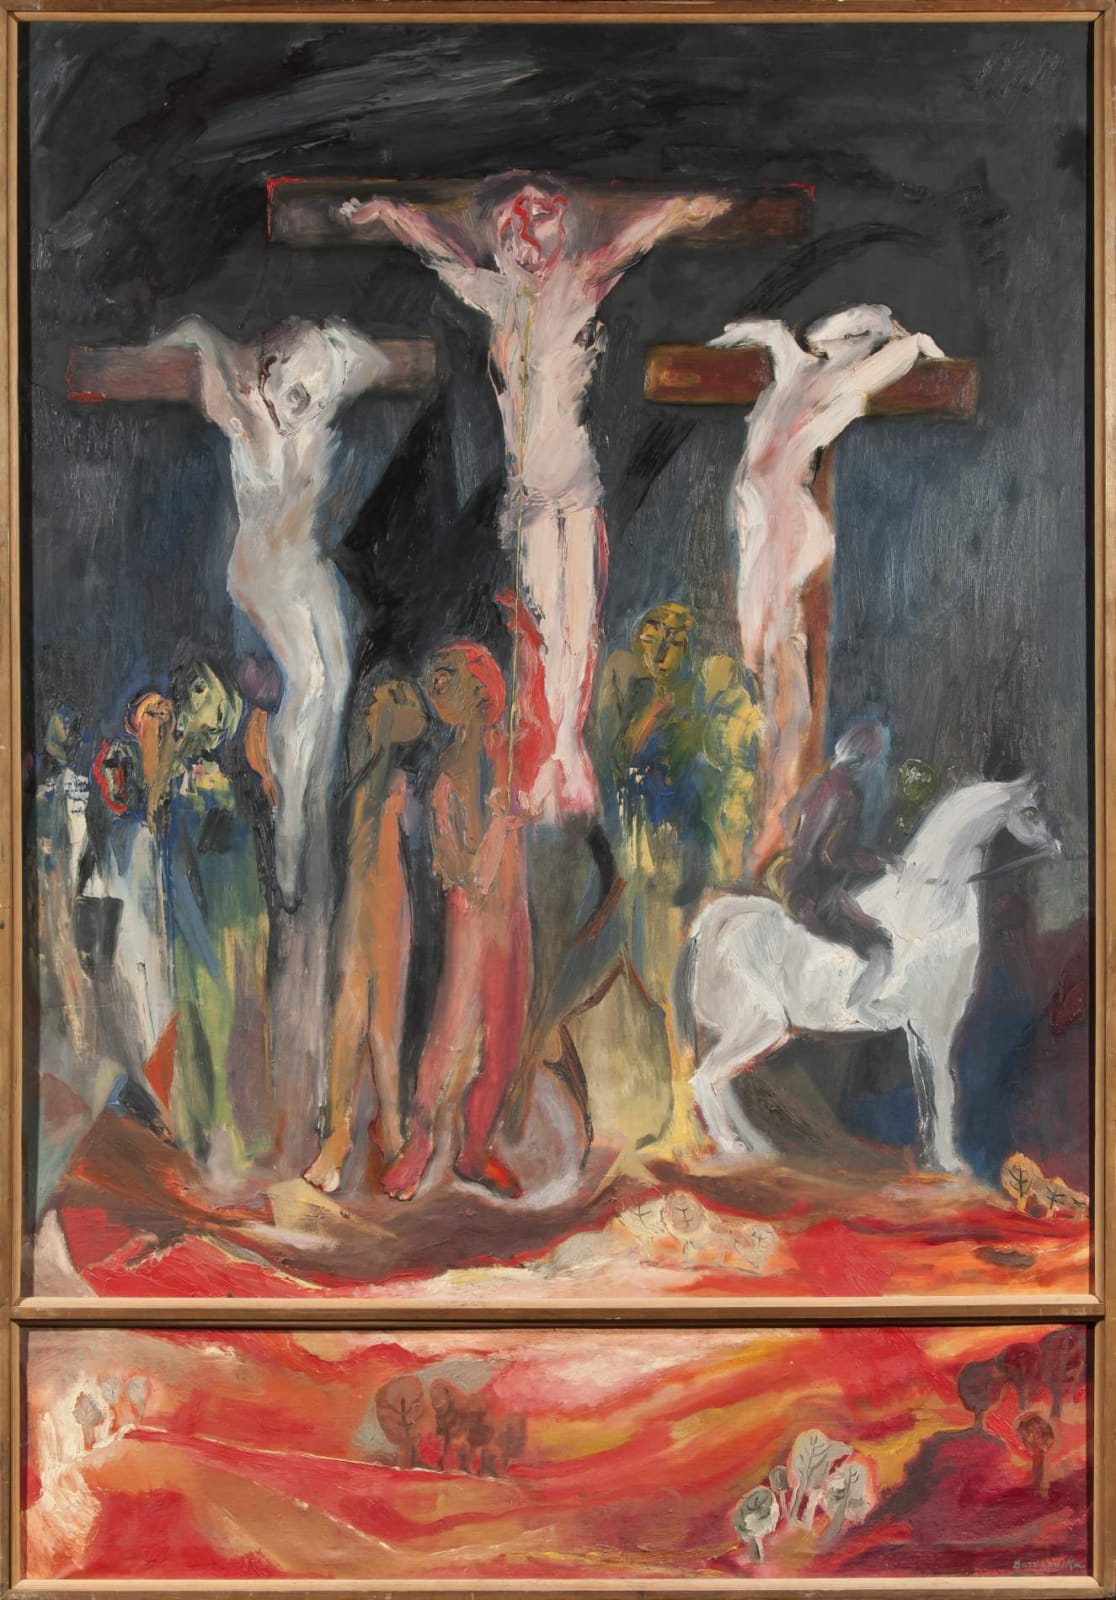 Janina Baranowska (1925-) Crucifixion n.d. Oil on canvas 122 x 91.5 cm Collection of Matthew Bateson To see and discover more about this artist click here